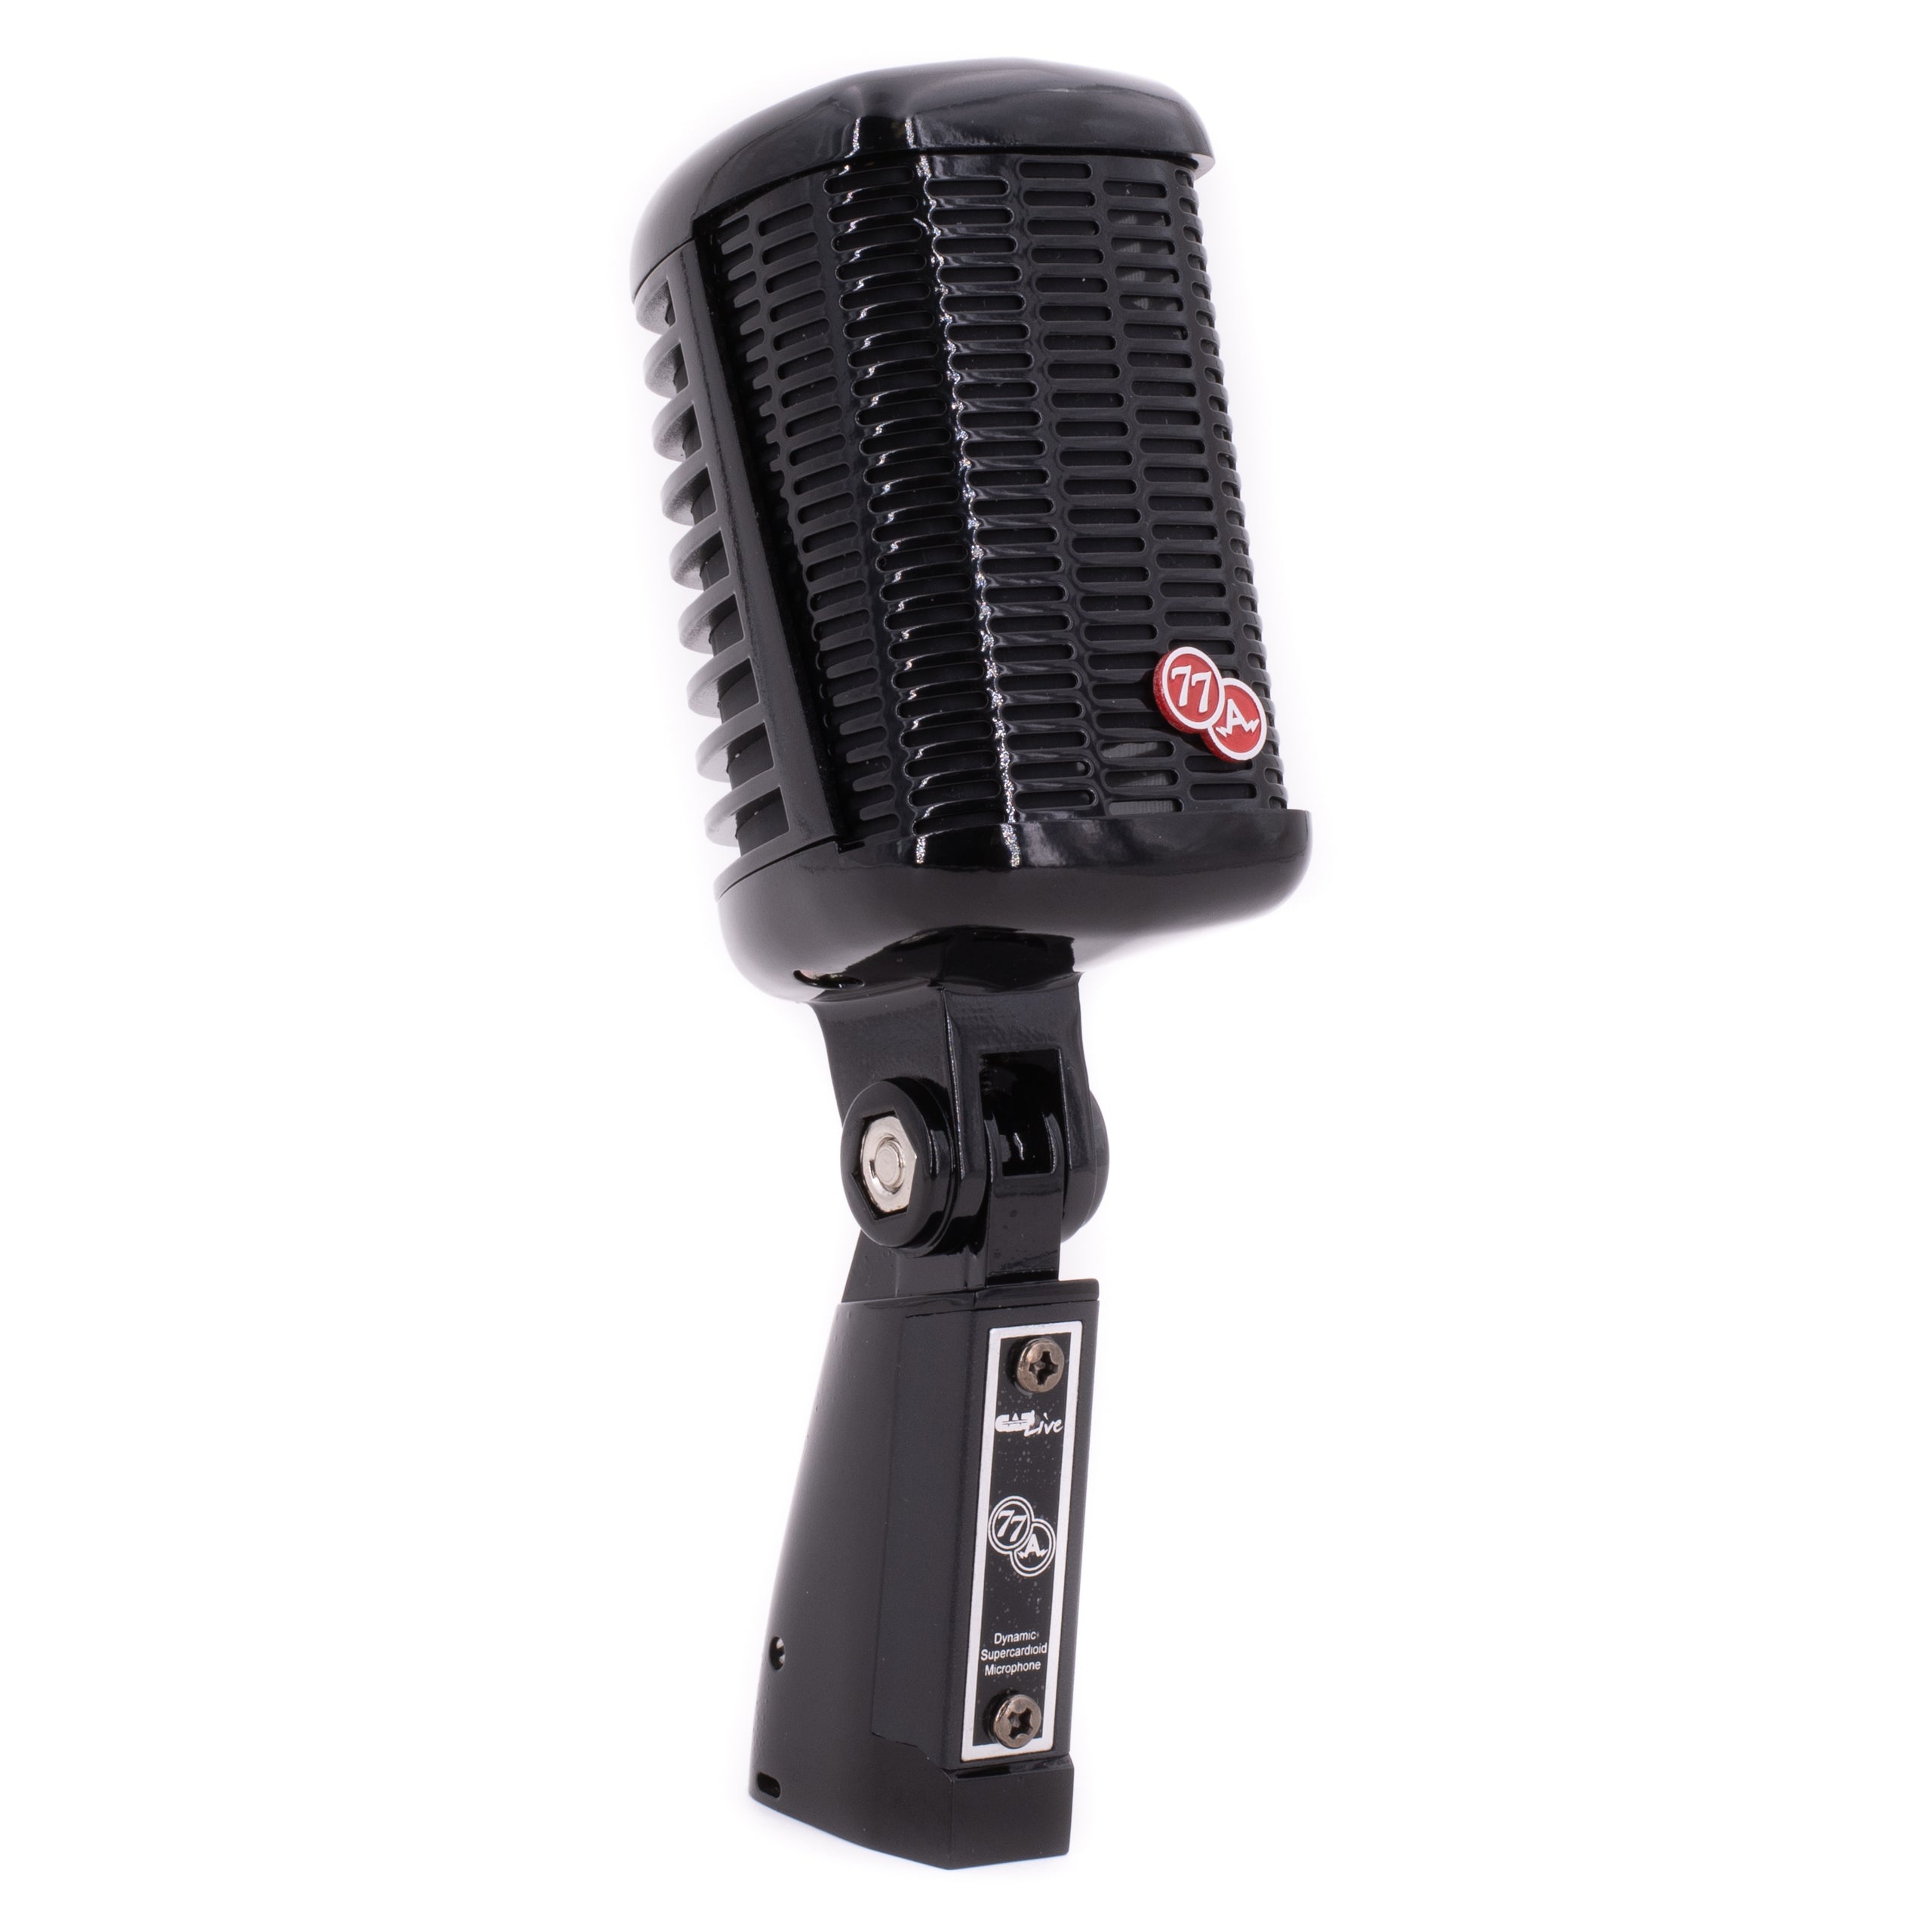 CAD Live A77 Supercardioid Large Diaphragm Dynamic Side Address Microphone - Gloss Black